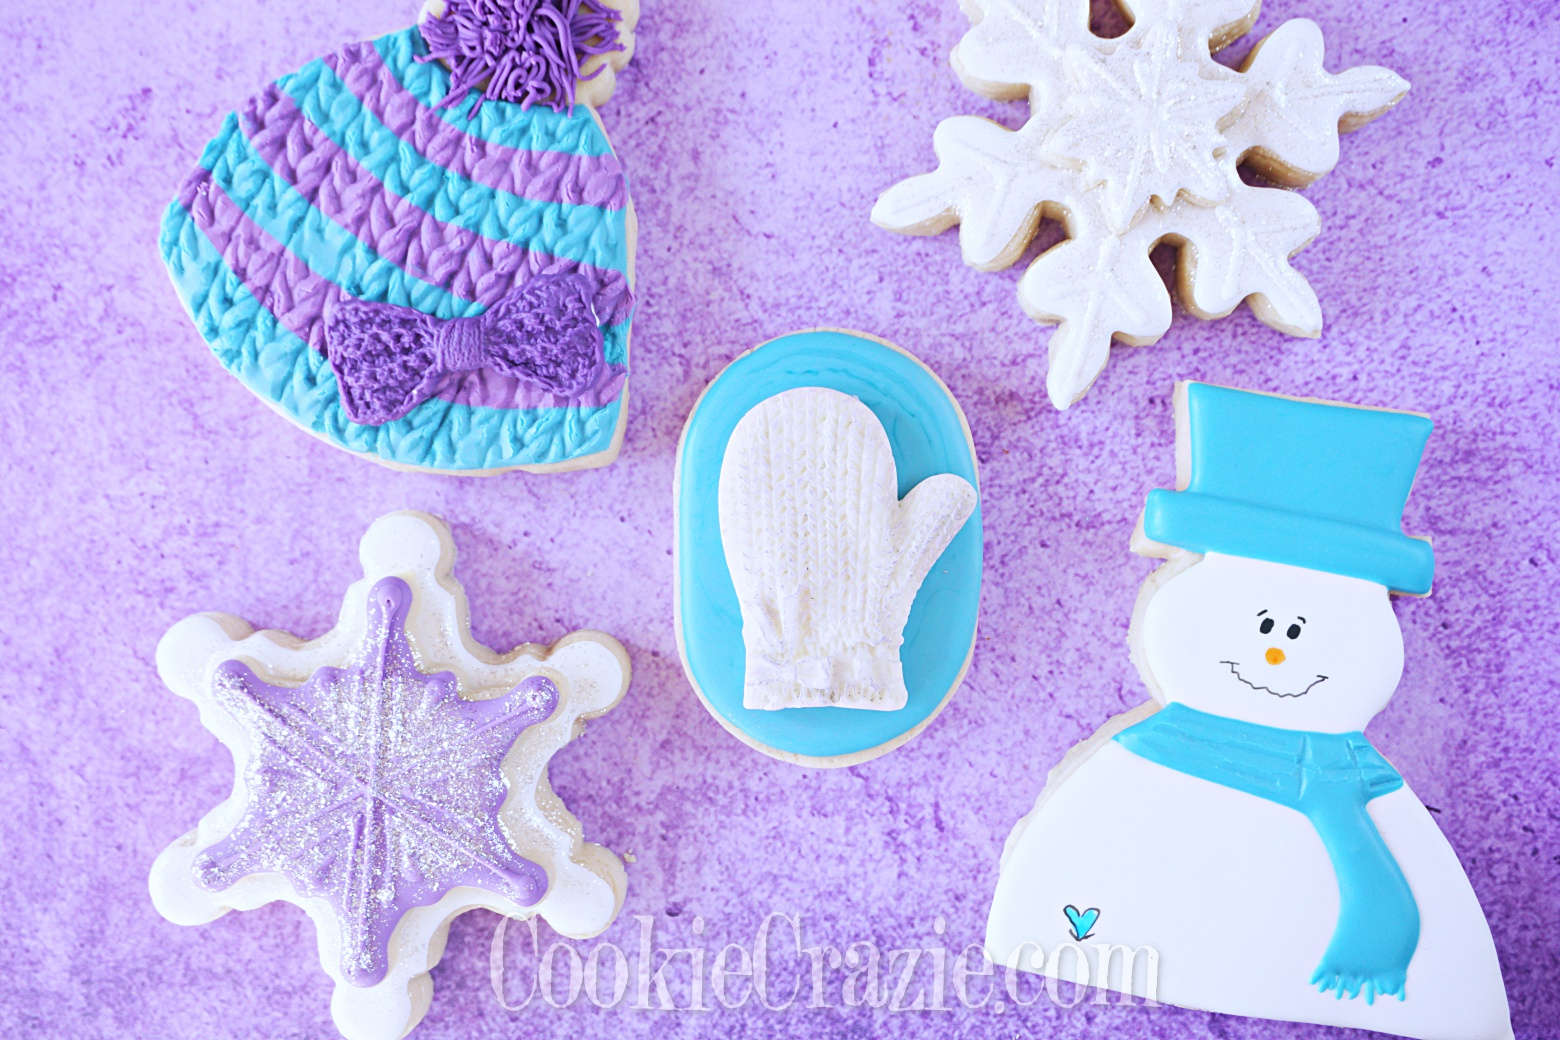  Winter Mitten Decorated Sugar Cookie YouTube video  HERE  